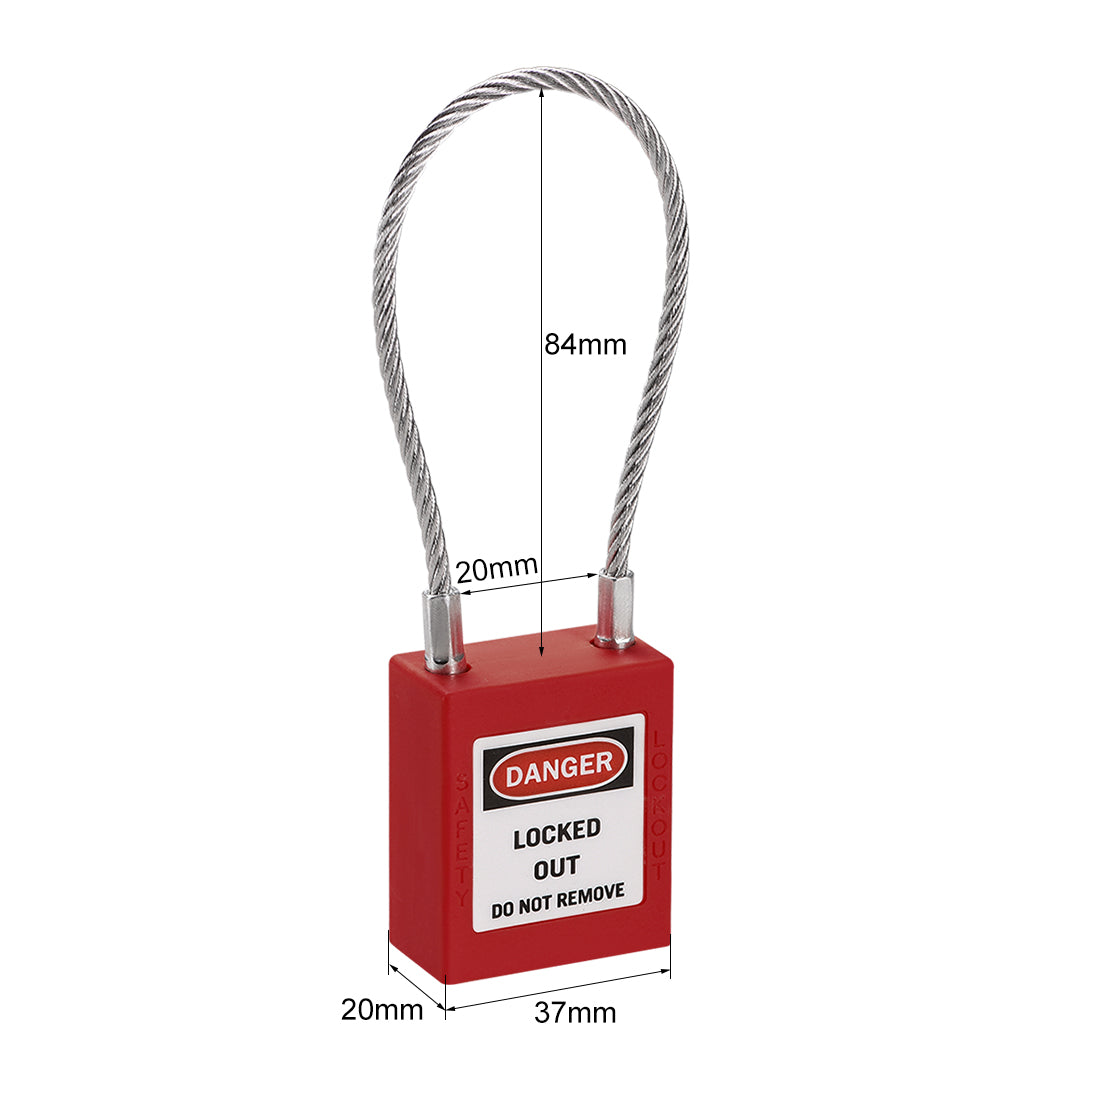 uxcell Uxcell Lockout Tagout Locks 3.3 Inch Shackle Key Alike Safety Padlock Plastic Lock Red